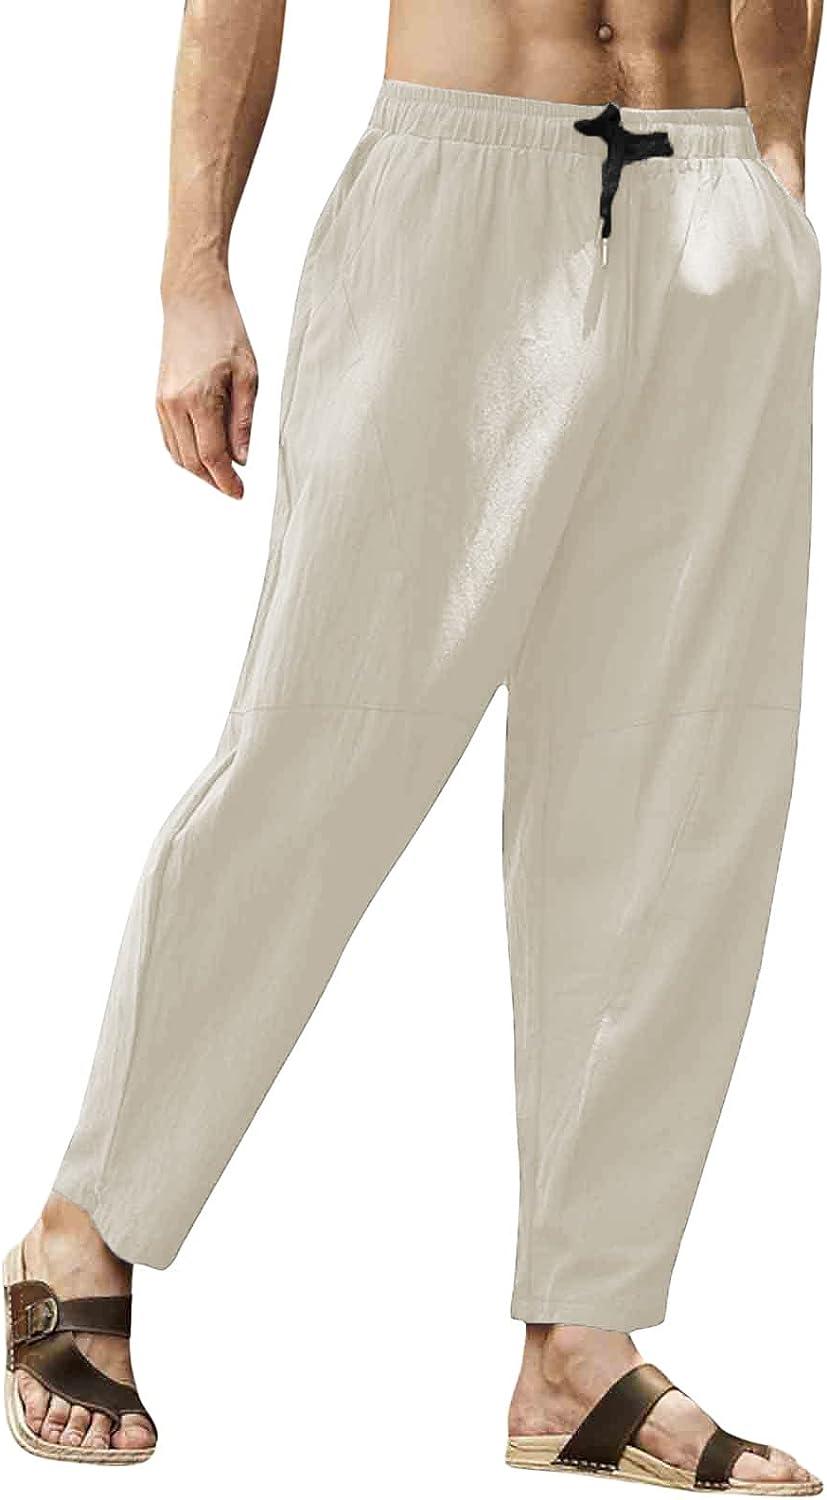 Curling men's summer pants in cement stretch cotton made in France